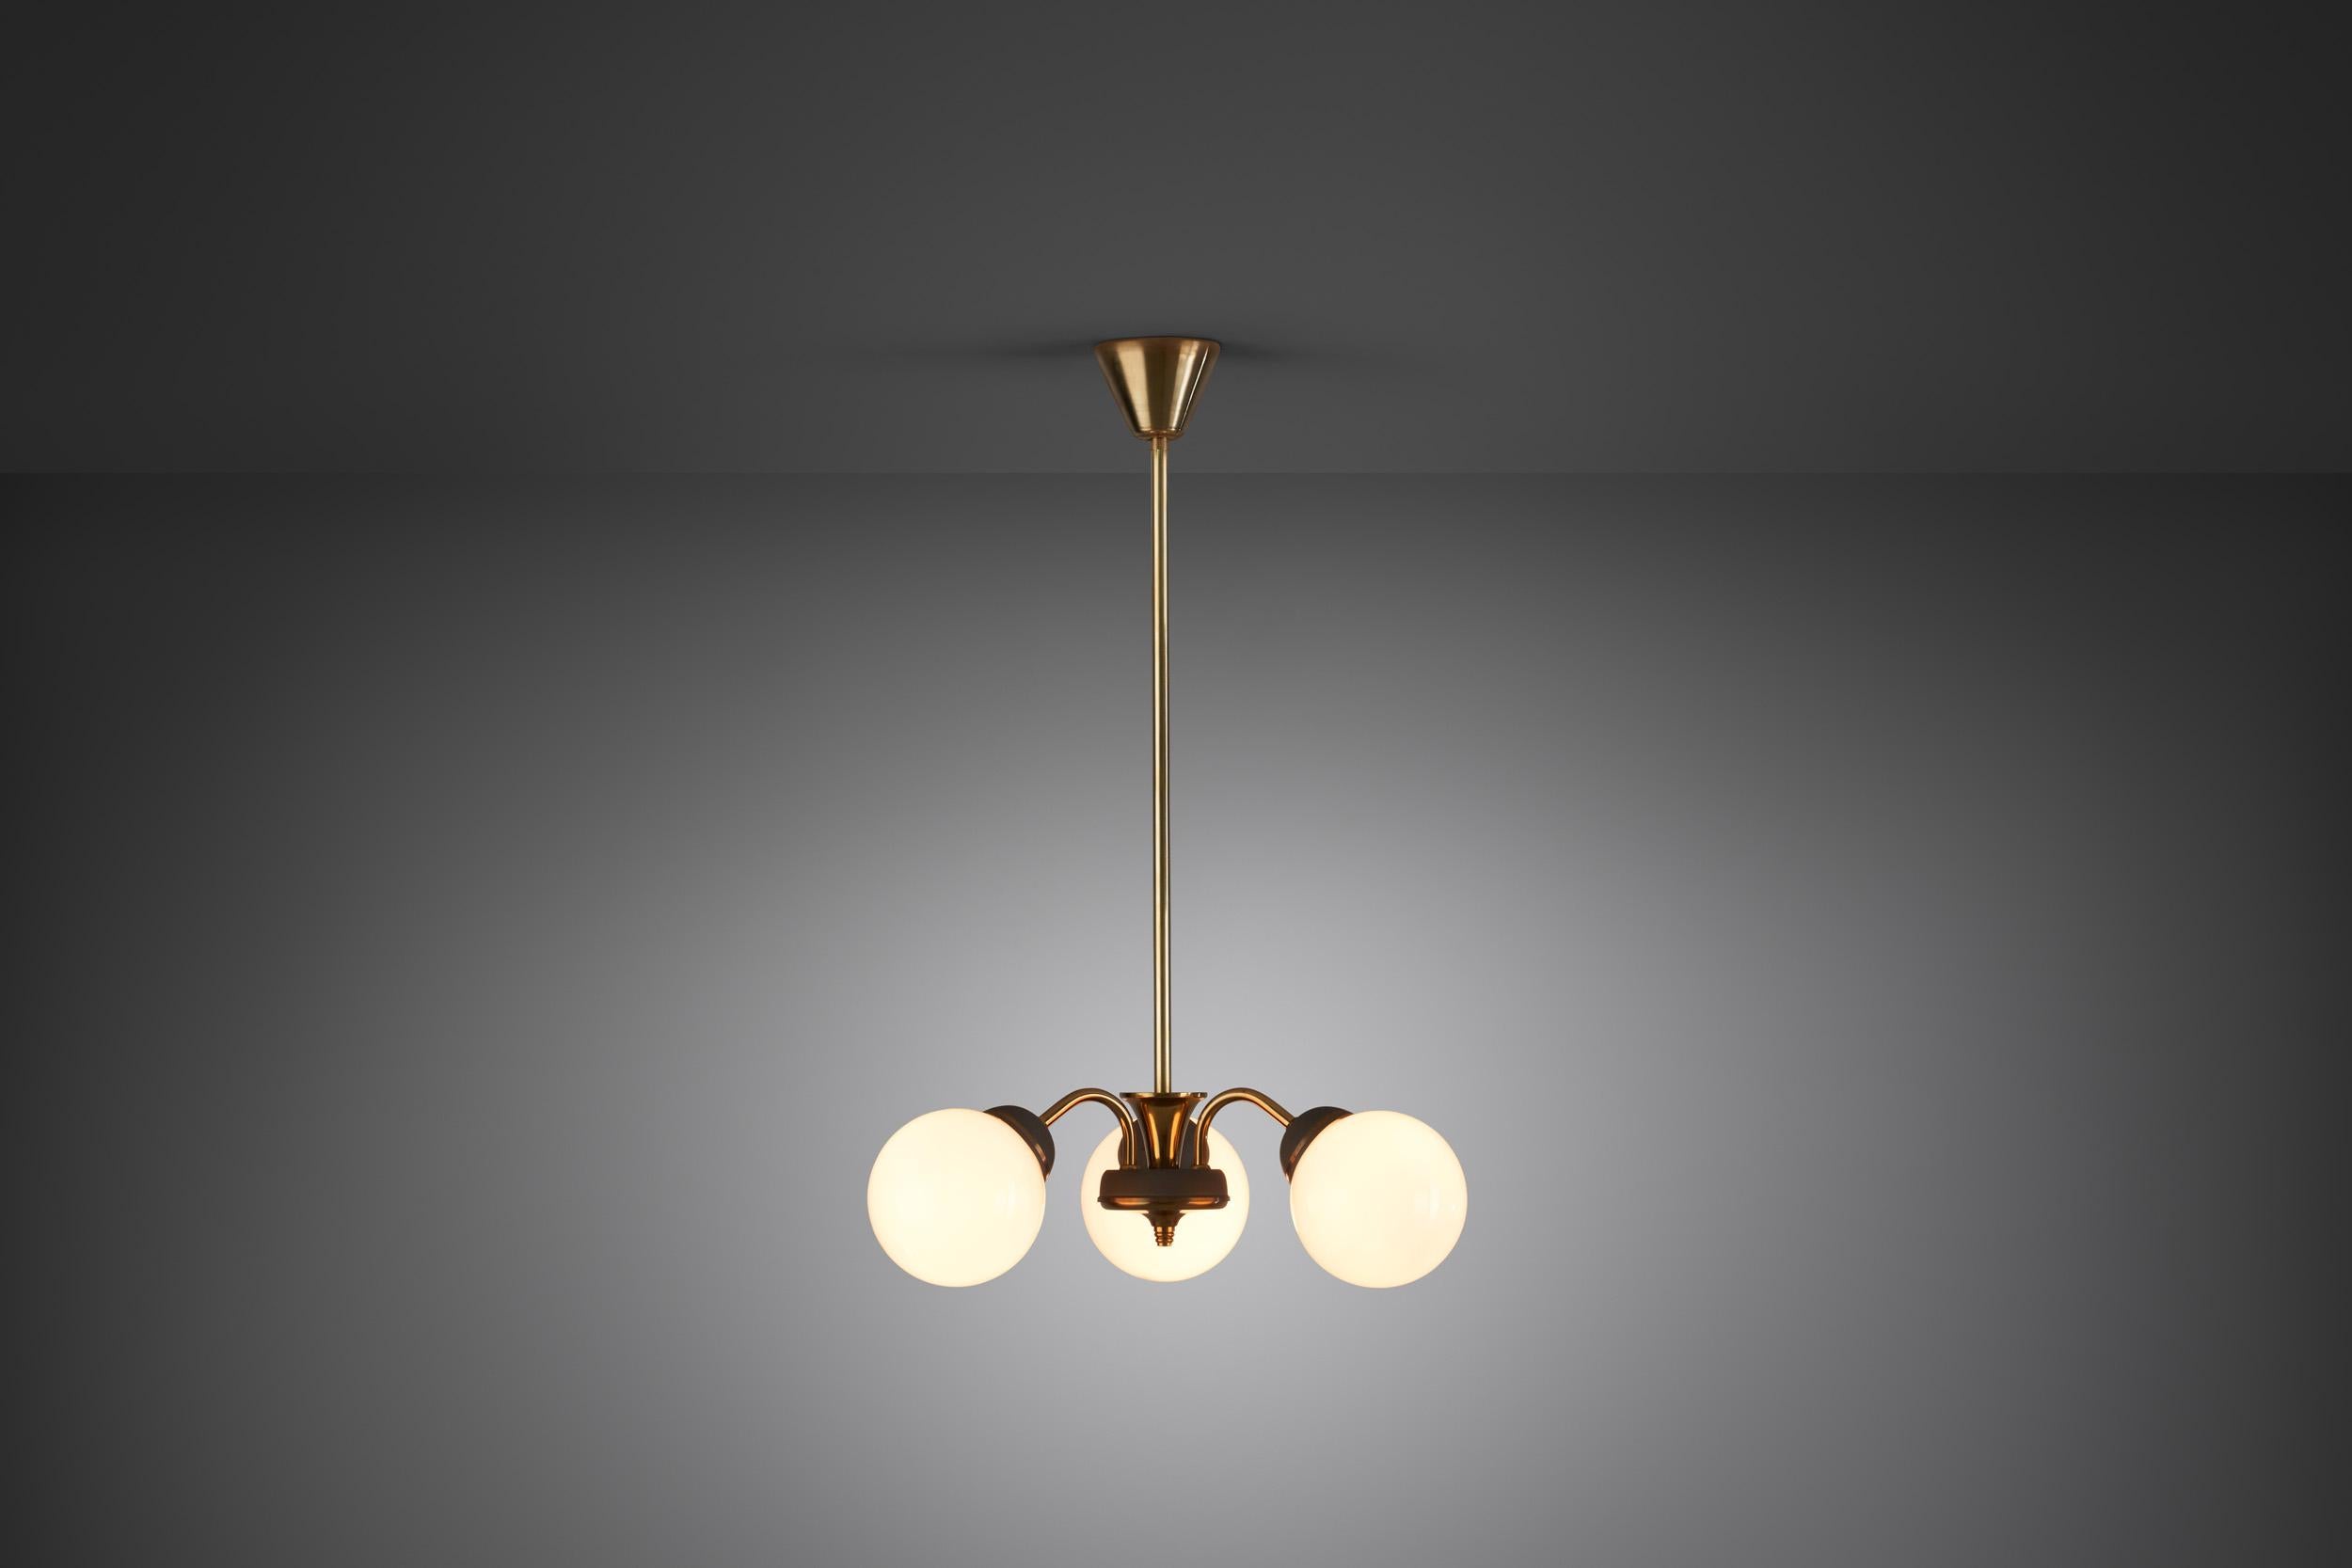 Brass Three-Armed Ceiling Lamp with Opal Glass Shades, Scandinavia 1950s For Sale 2